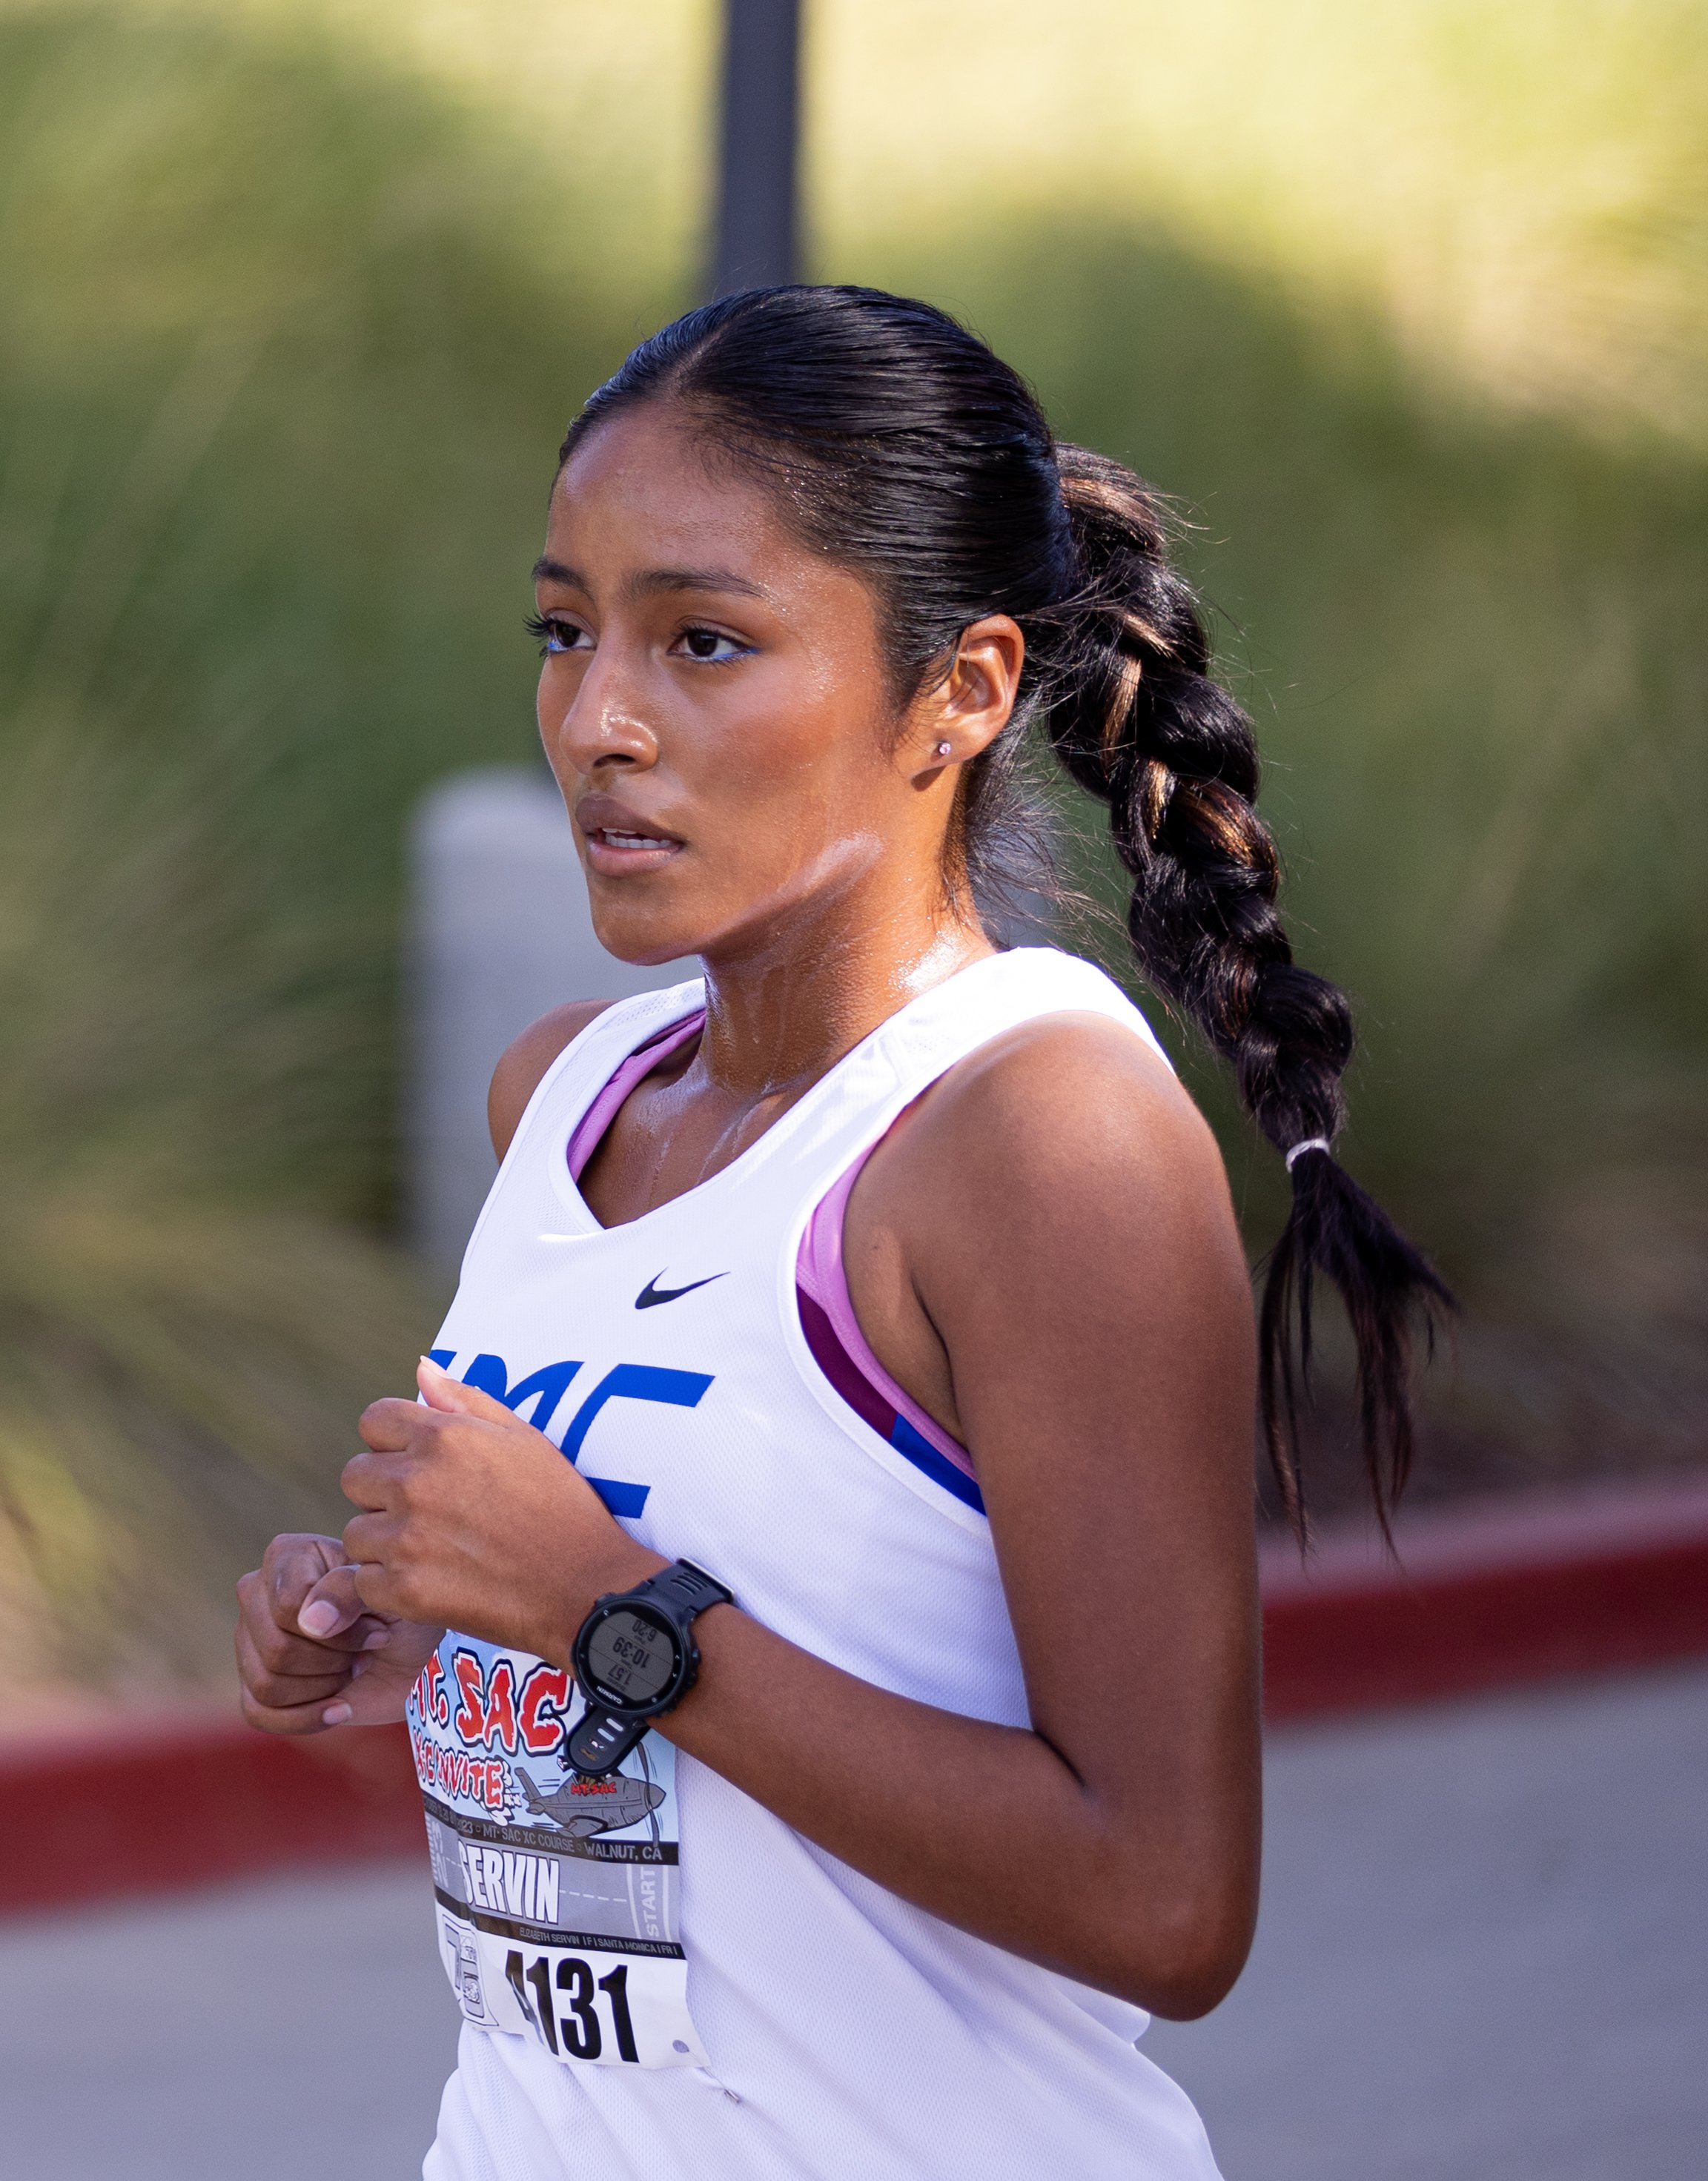  Lisa Servin running at the MT. SAC Cross Country Invitational on Friday, Oct 13 at MT. SAC in Walnut, Calif. (Danilo Perez | The Corsair) 